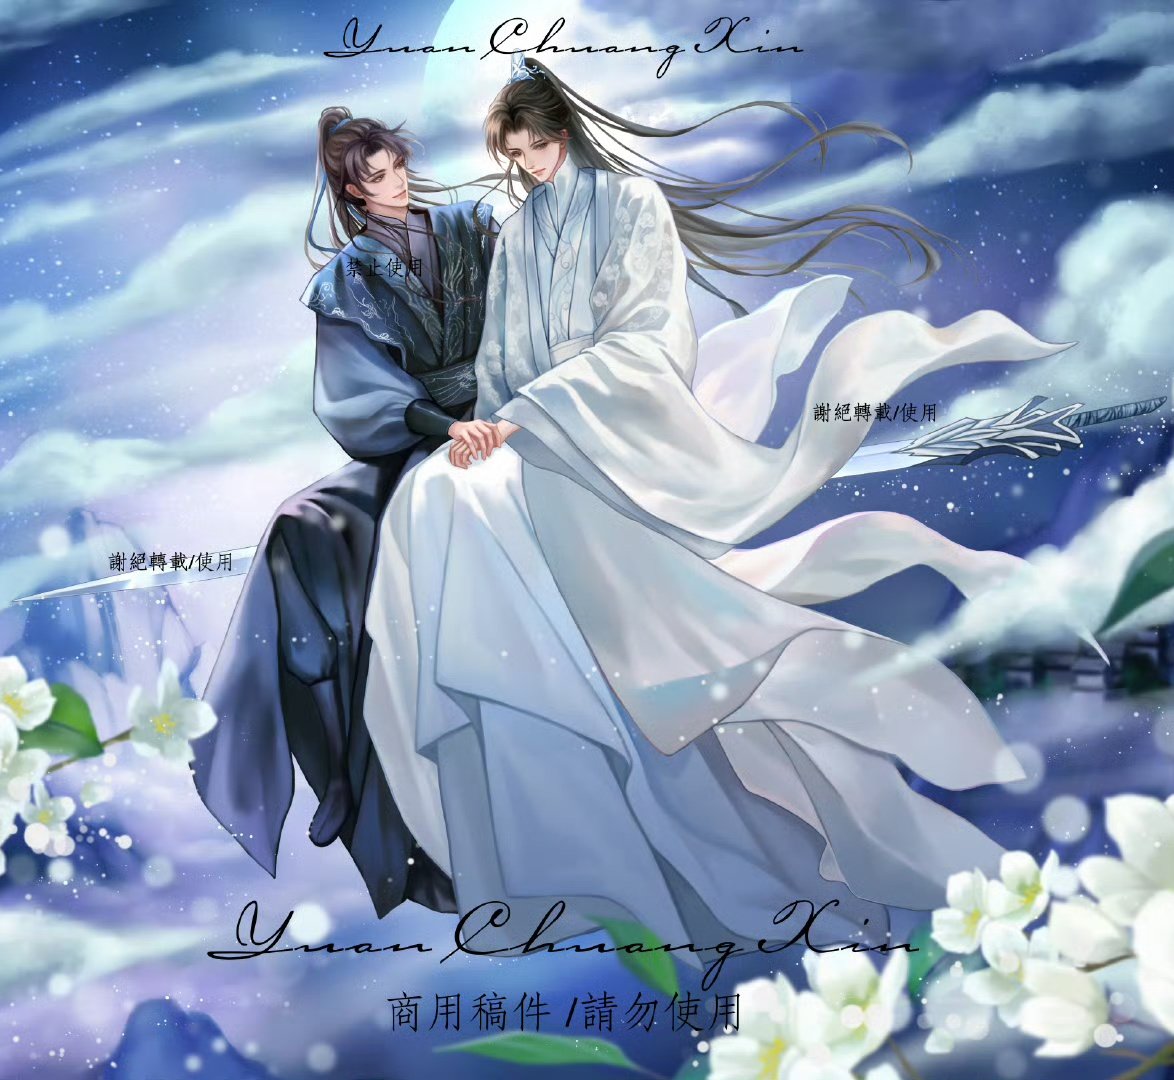 “I love you, not the way a disciple loves his Shizun, but… I’m being bold, I… I love you.”

“… I have a bad
temper.”

“You’re very nice to me.”

“I, I’m old.”

“You look younger than me.”

This confession scene for Yuan Chuang Xin bookstore 😭♥️
weibo.com/5535032476/503…